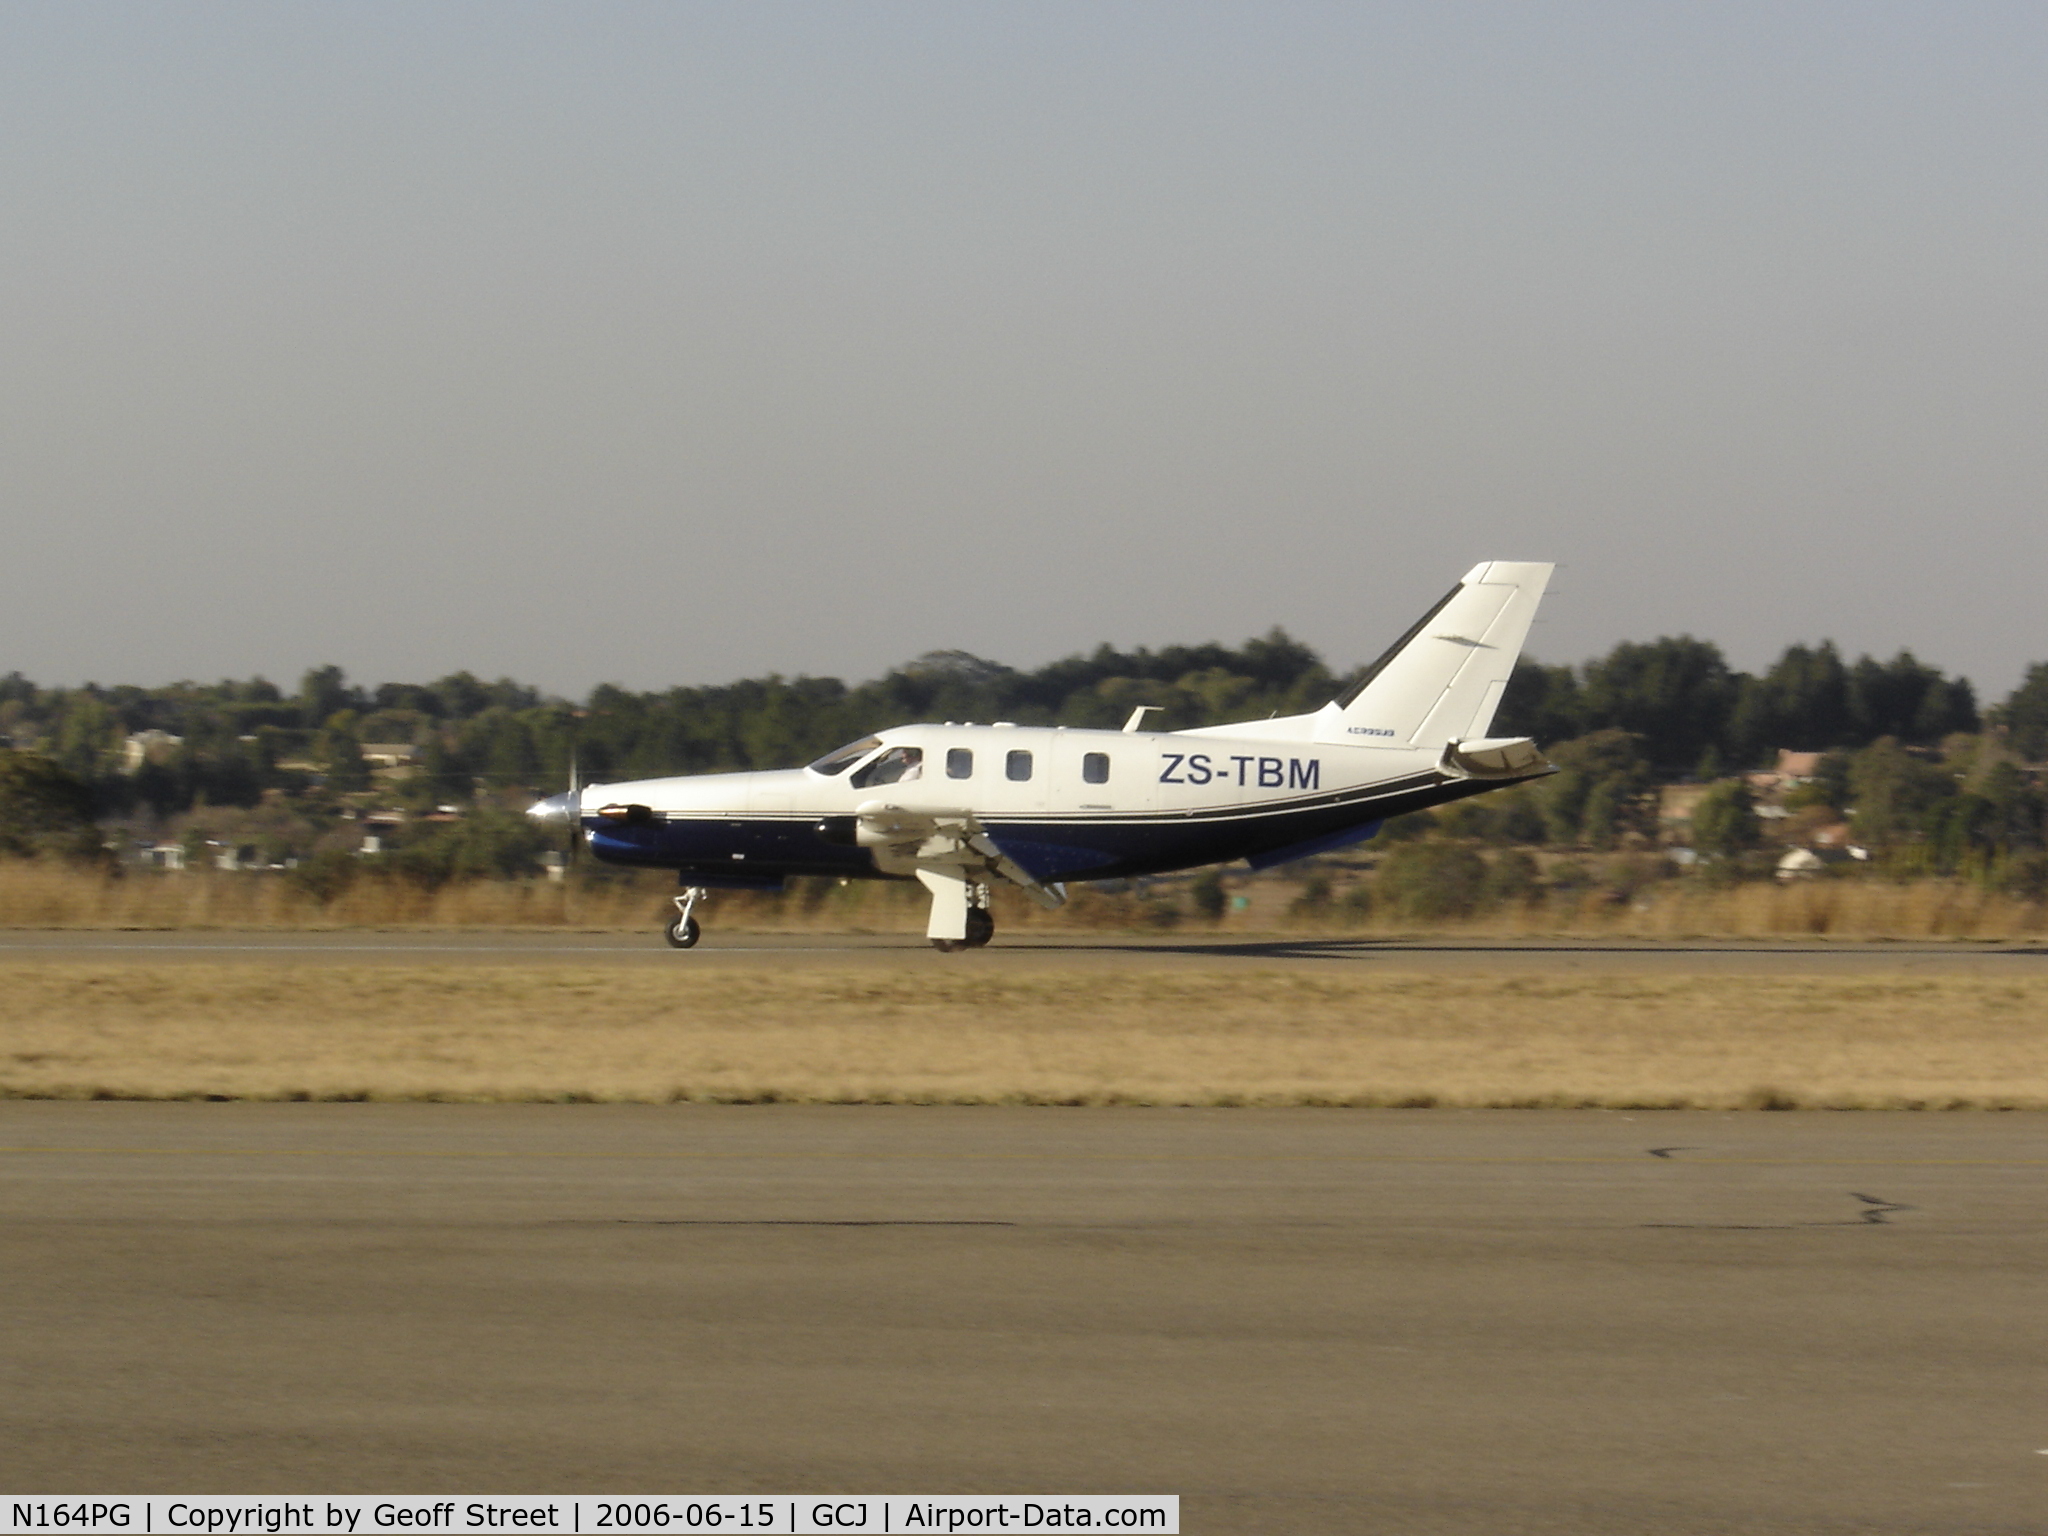 N164PG, Socata TBM-700 C/N 164, This aircraft is now registered ZS-TBM and is seen here landing at Grand Central Airport in Johannesburg South Africa.